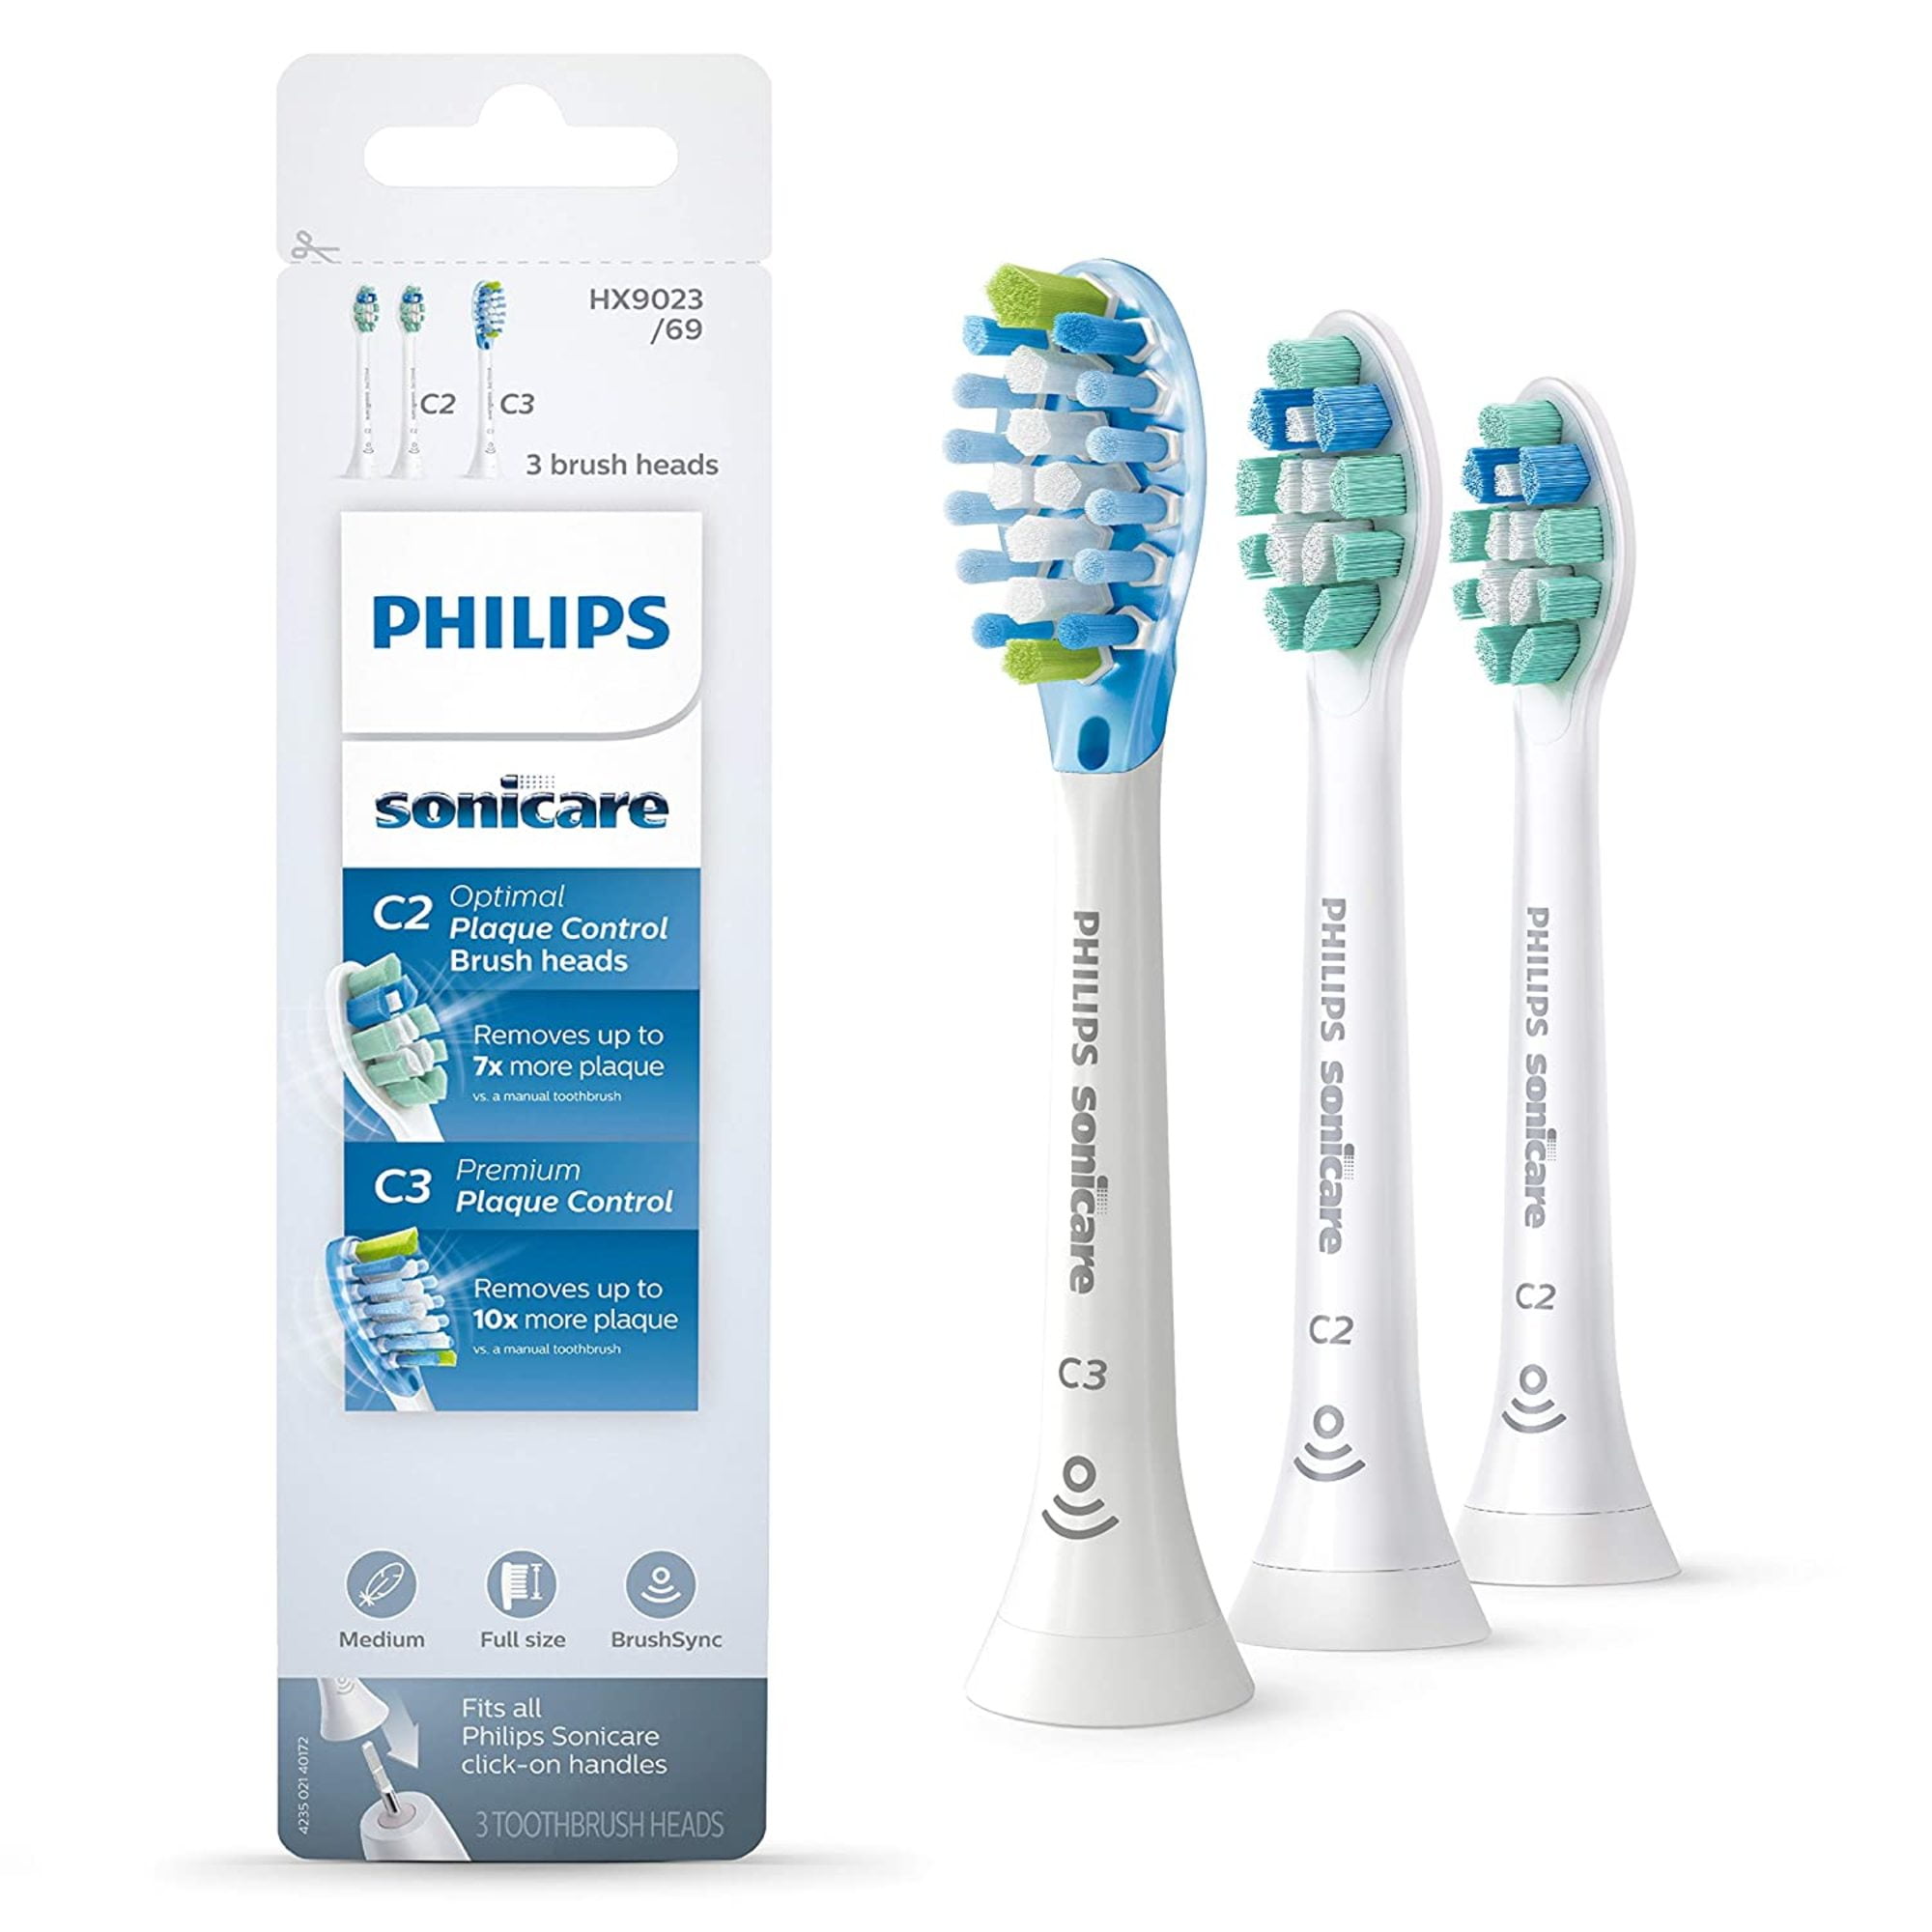 Philips Sonicare E-Series Replacement Toothbrush Heads, HX7023/64 